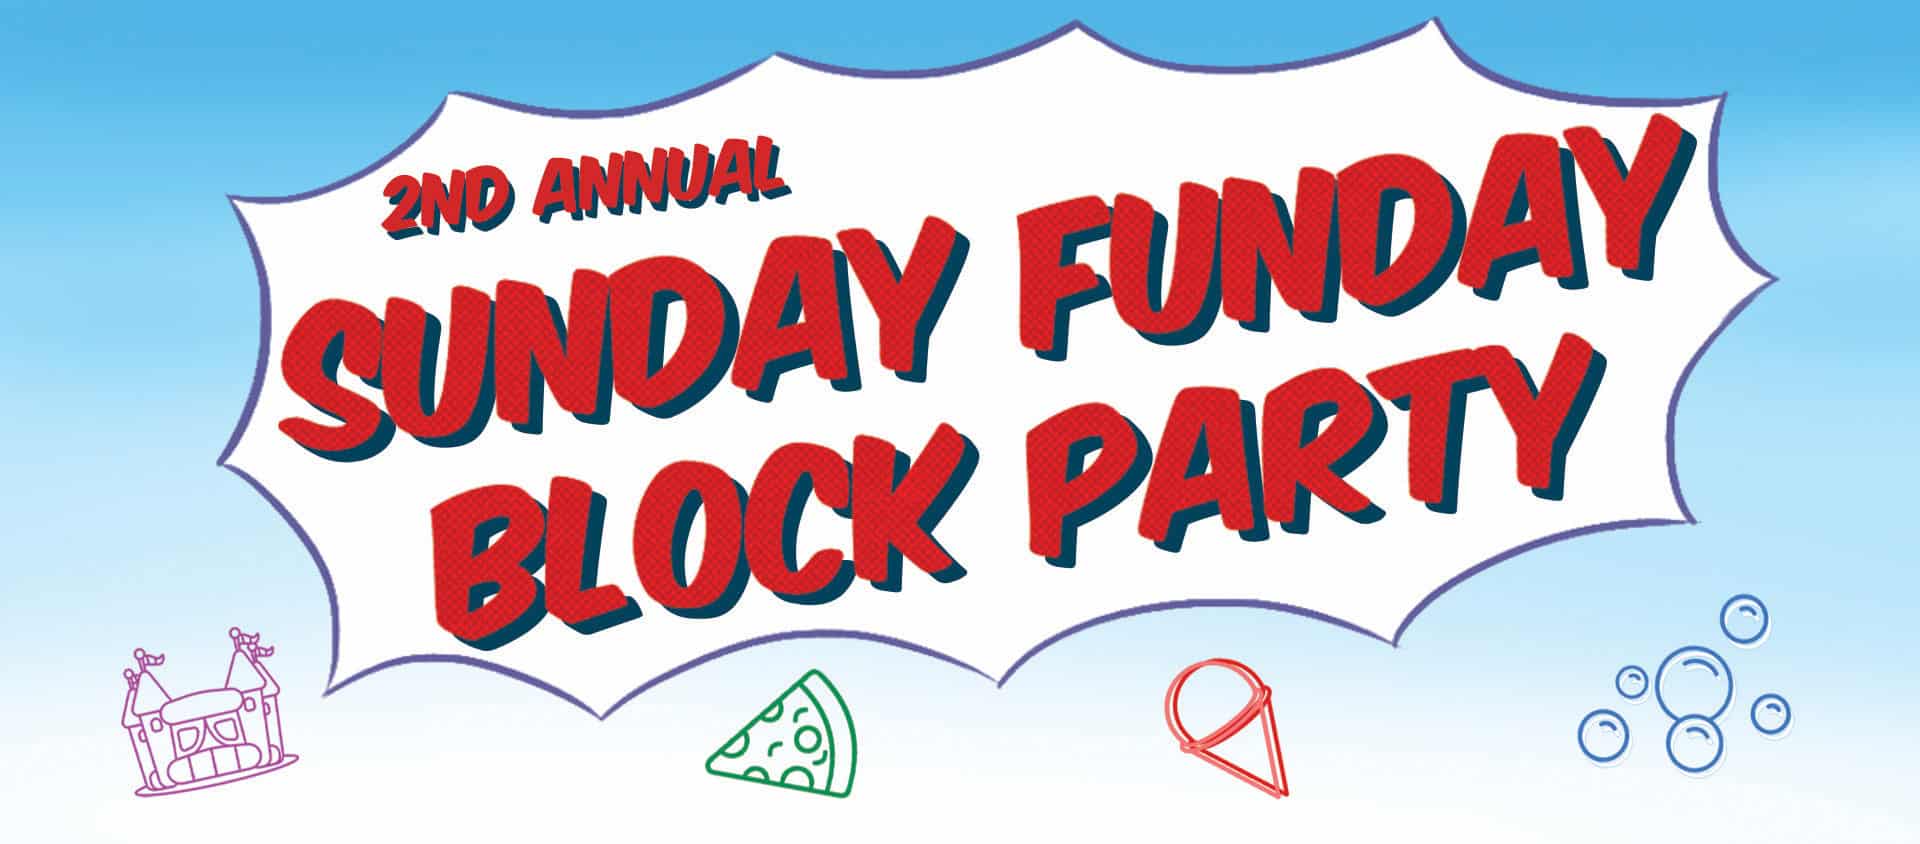 2nd Annual Sunday Funday Block Party!